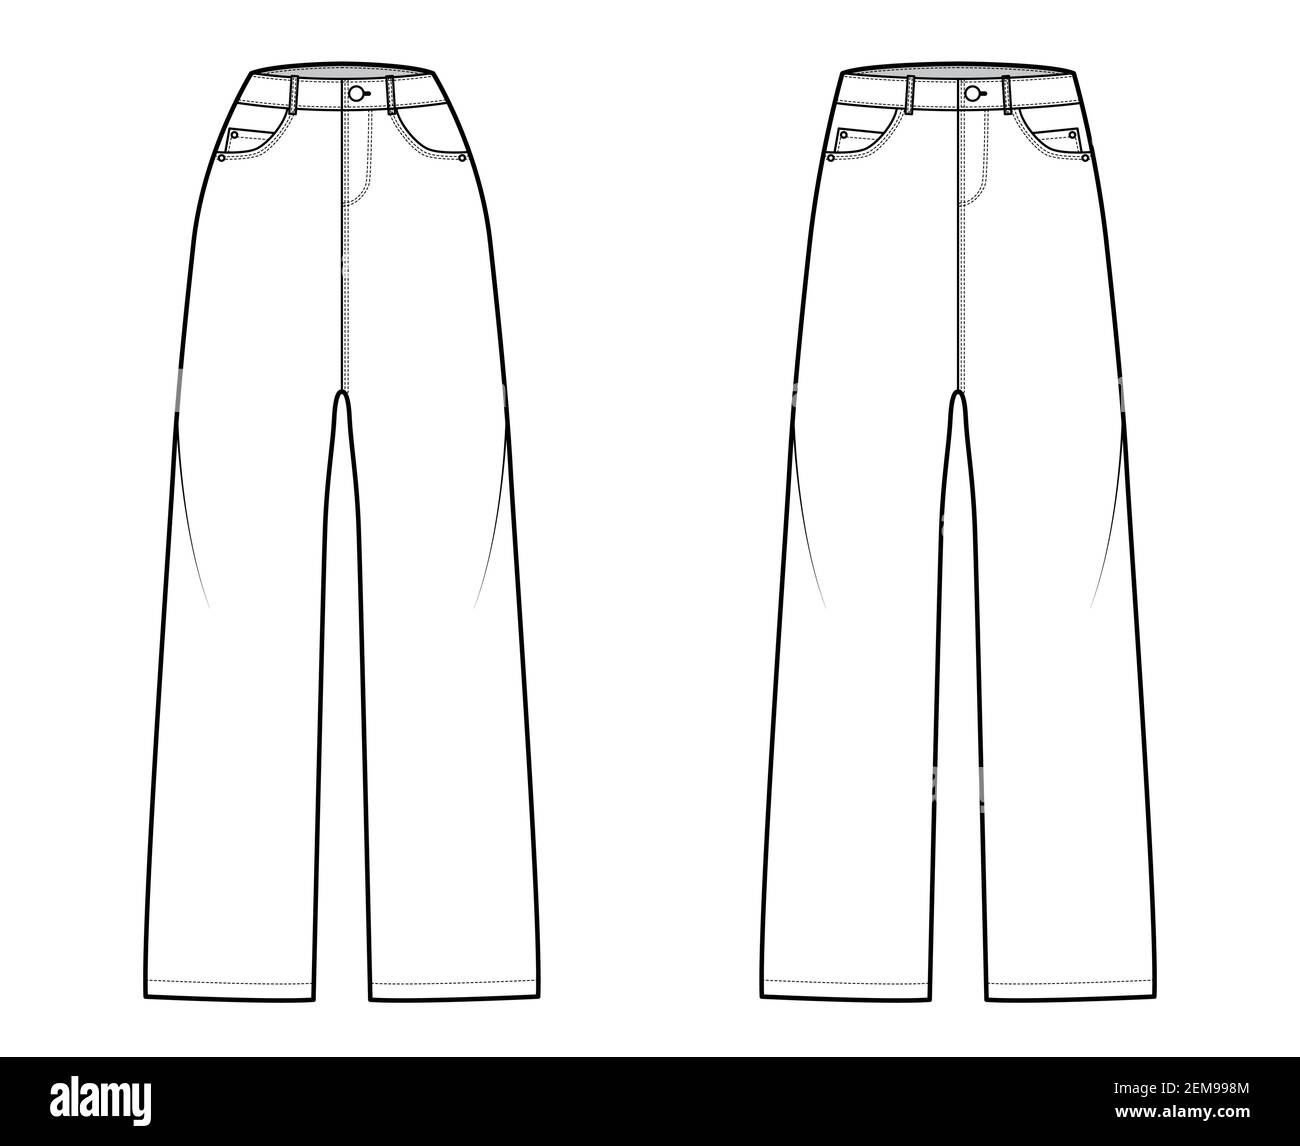 Set of Baggy Jeans Denim pants technical fashion illustration with full  length, normal low waist, high rise, 5 pockets, belt loops. Flat bottom  template front, white color style. Women, men unisex CAD